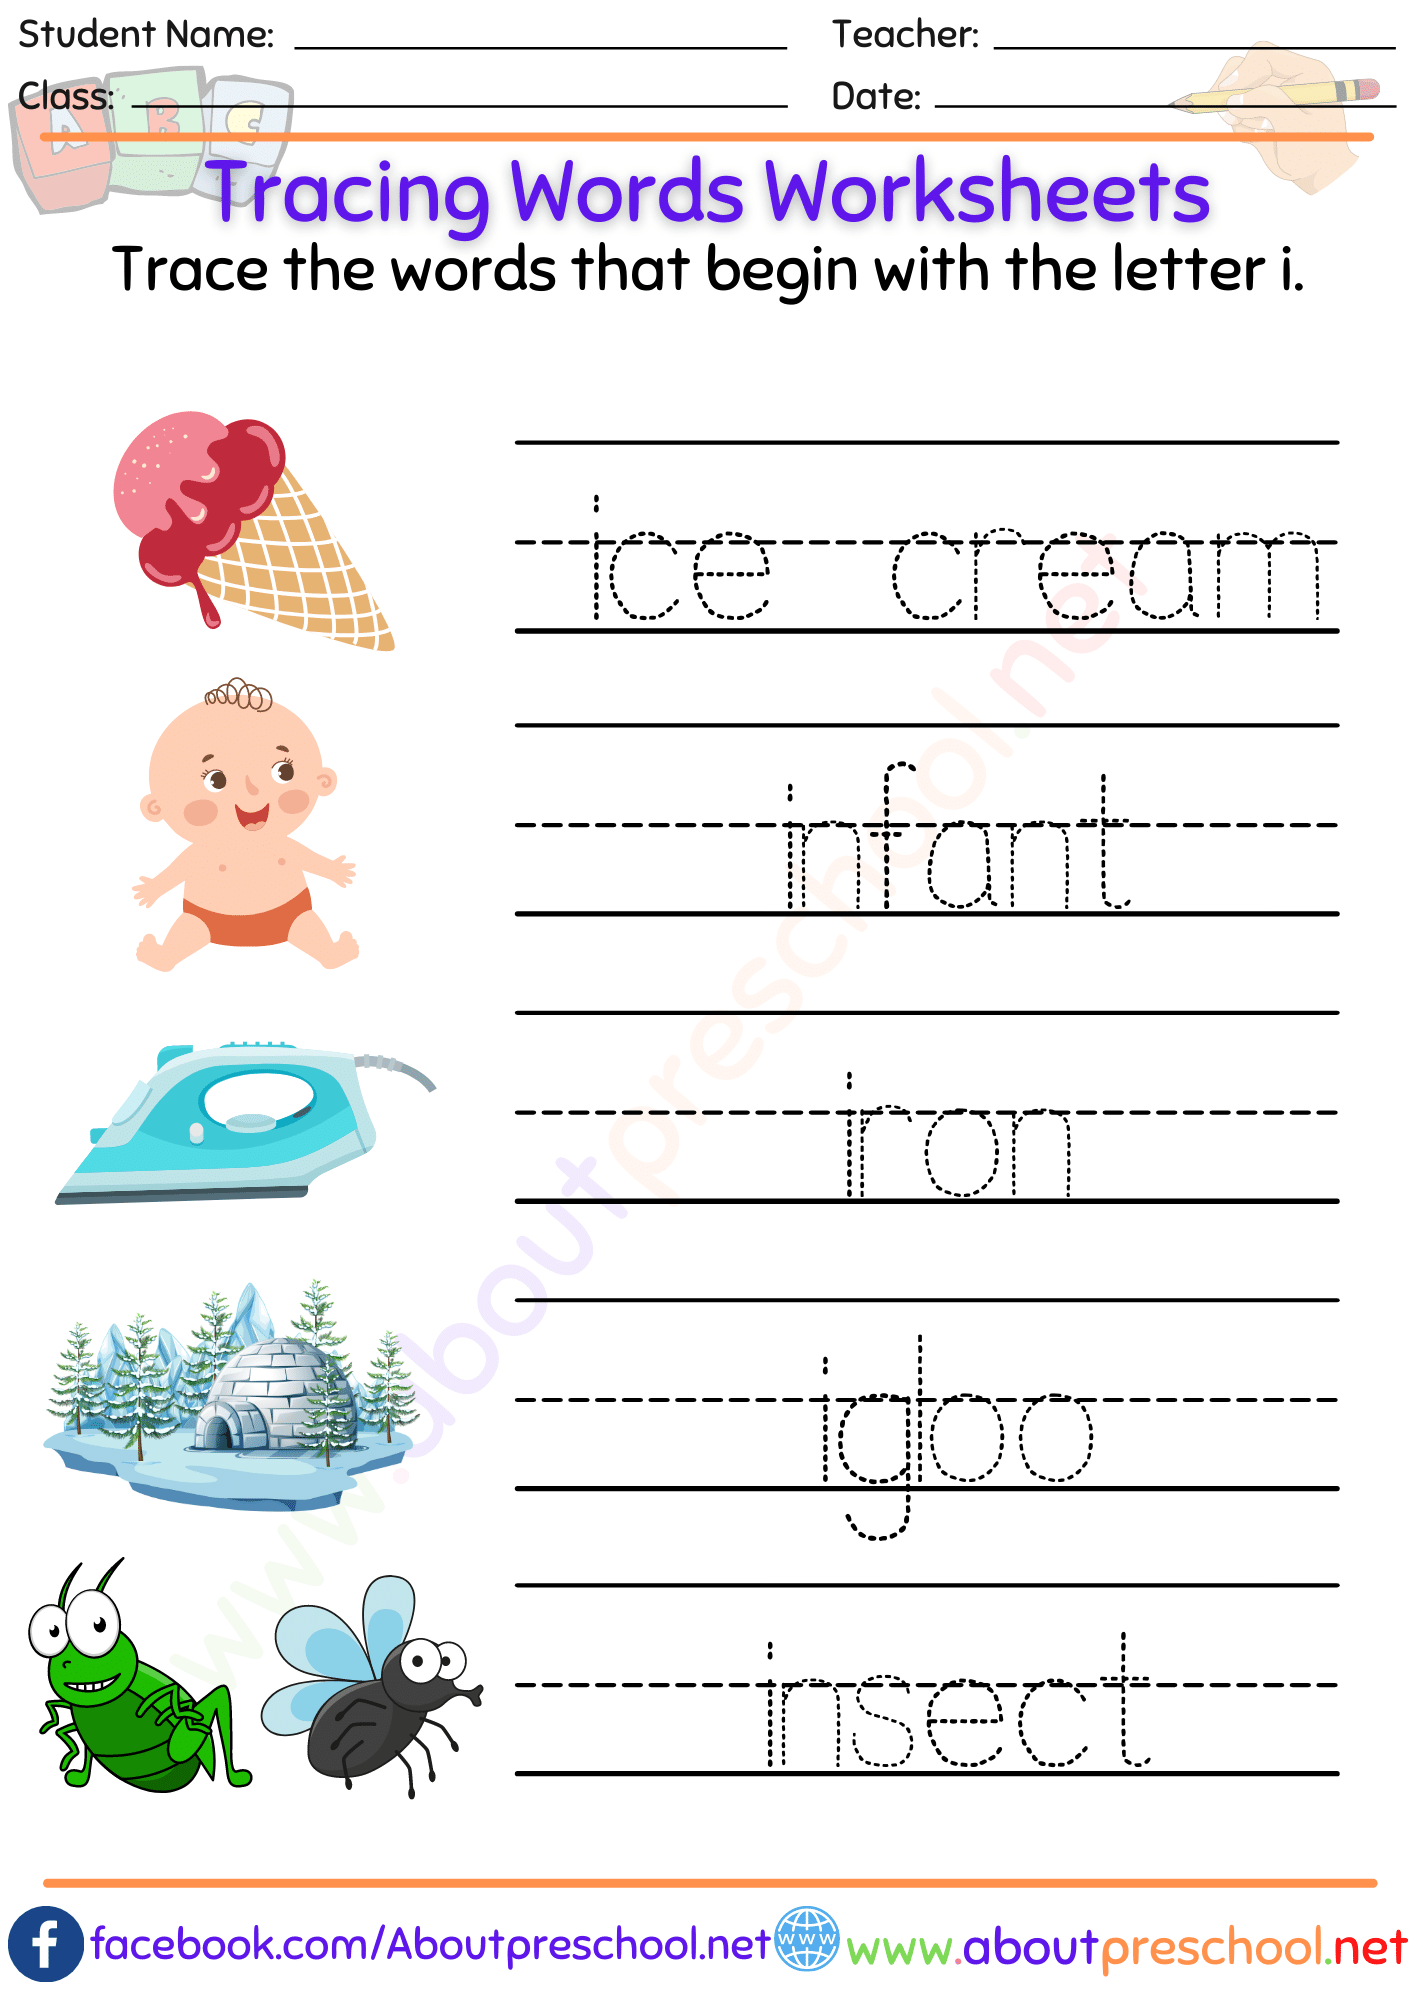 Tracing Words Worksheets i